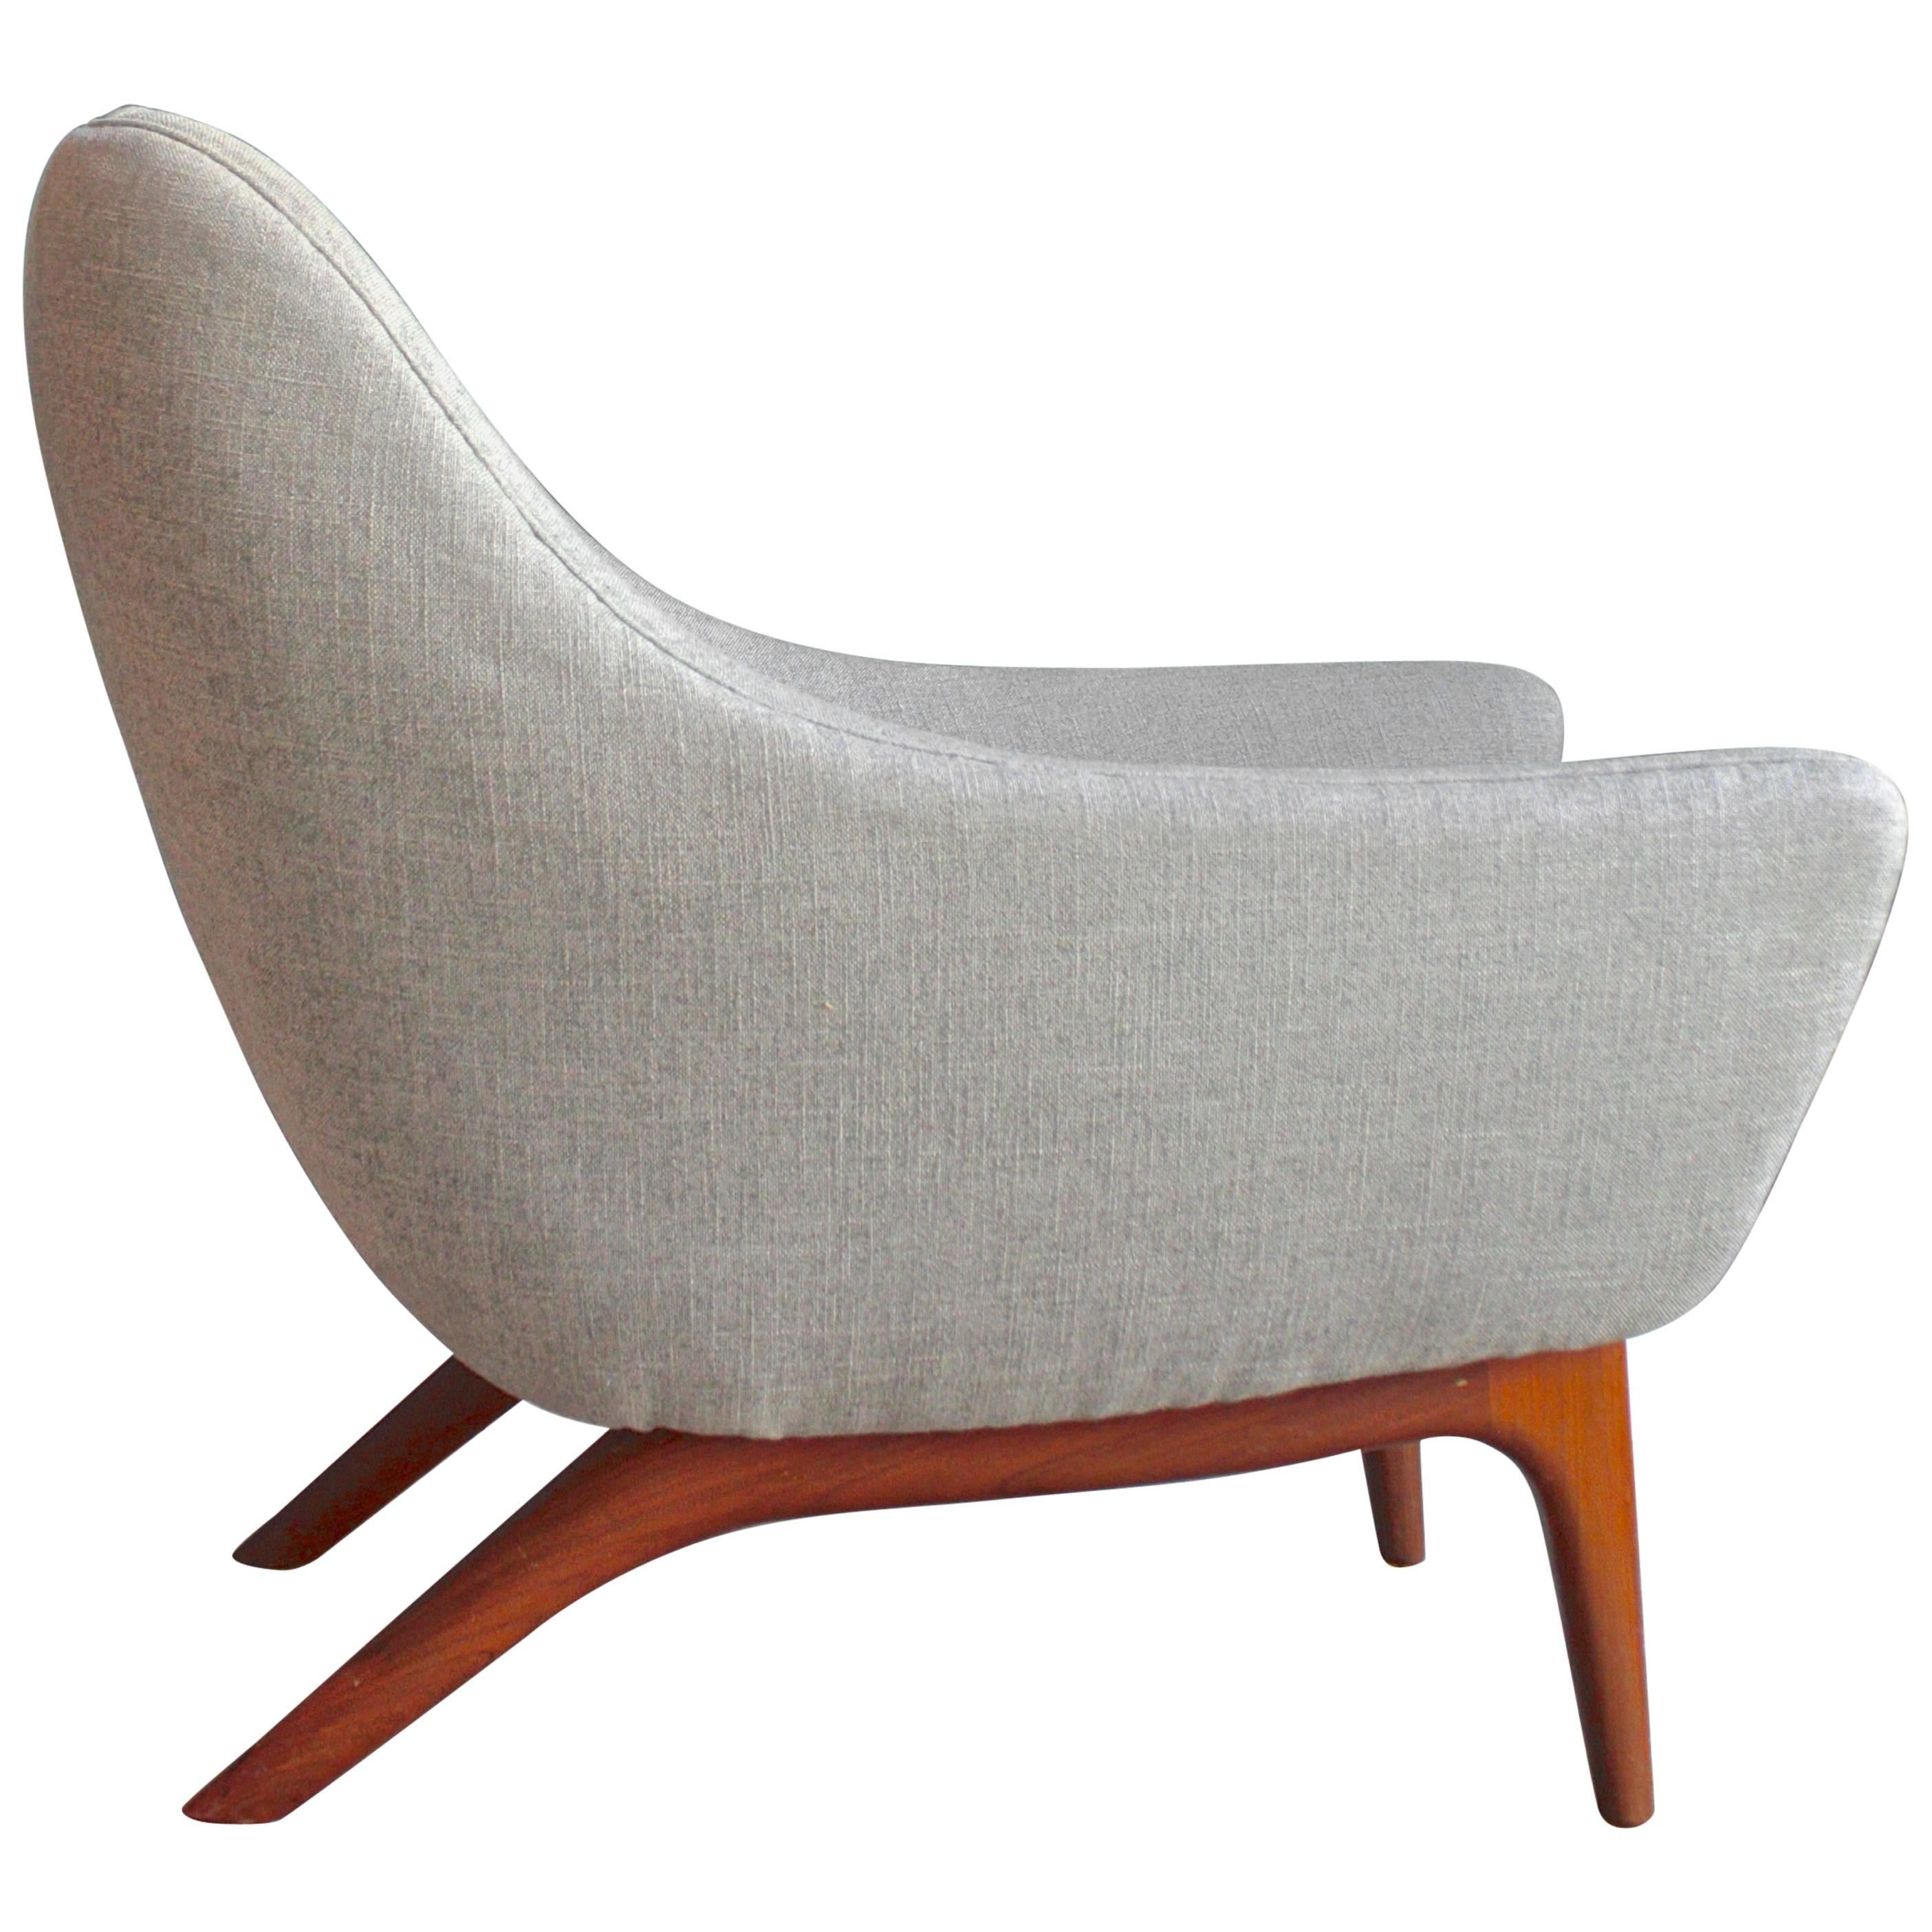 Rare ML 90 Easy Chair by Illum Wikkelsø for A. Mikael Laursen